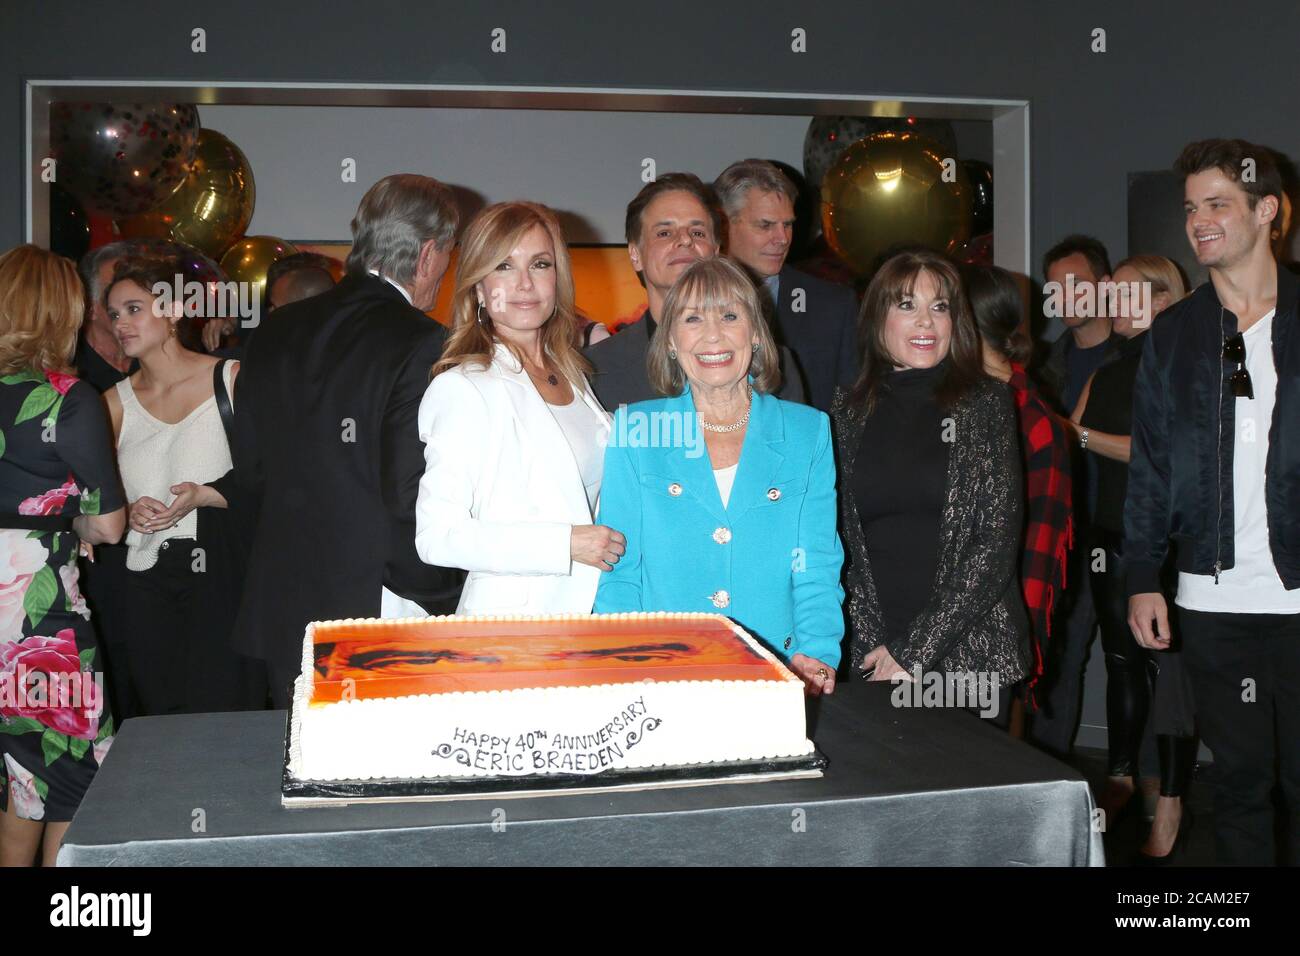 LOS ANGELES - FEB 7:  Tracey Bregman, Marla Adams, Kate Linder at the Eric Braeden 40th Anniversary Celebration on The Young and The Restless at the Television City on February 7, 2020 in Los Angeles, CA Stock Photo